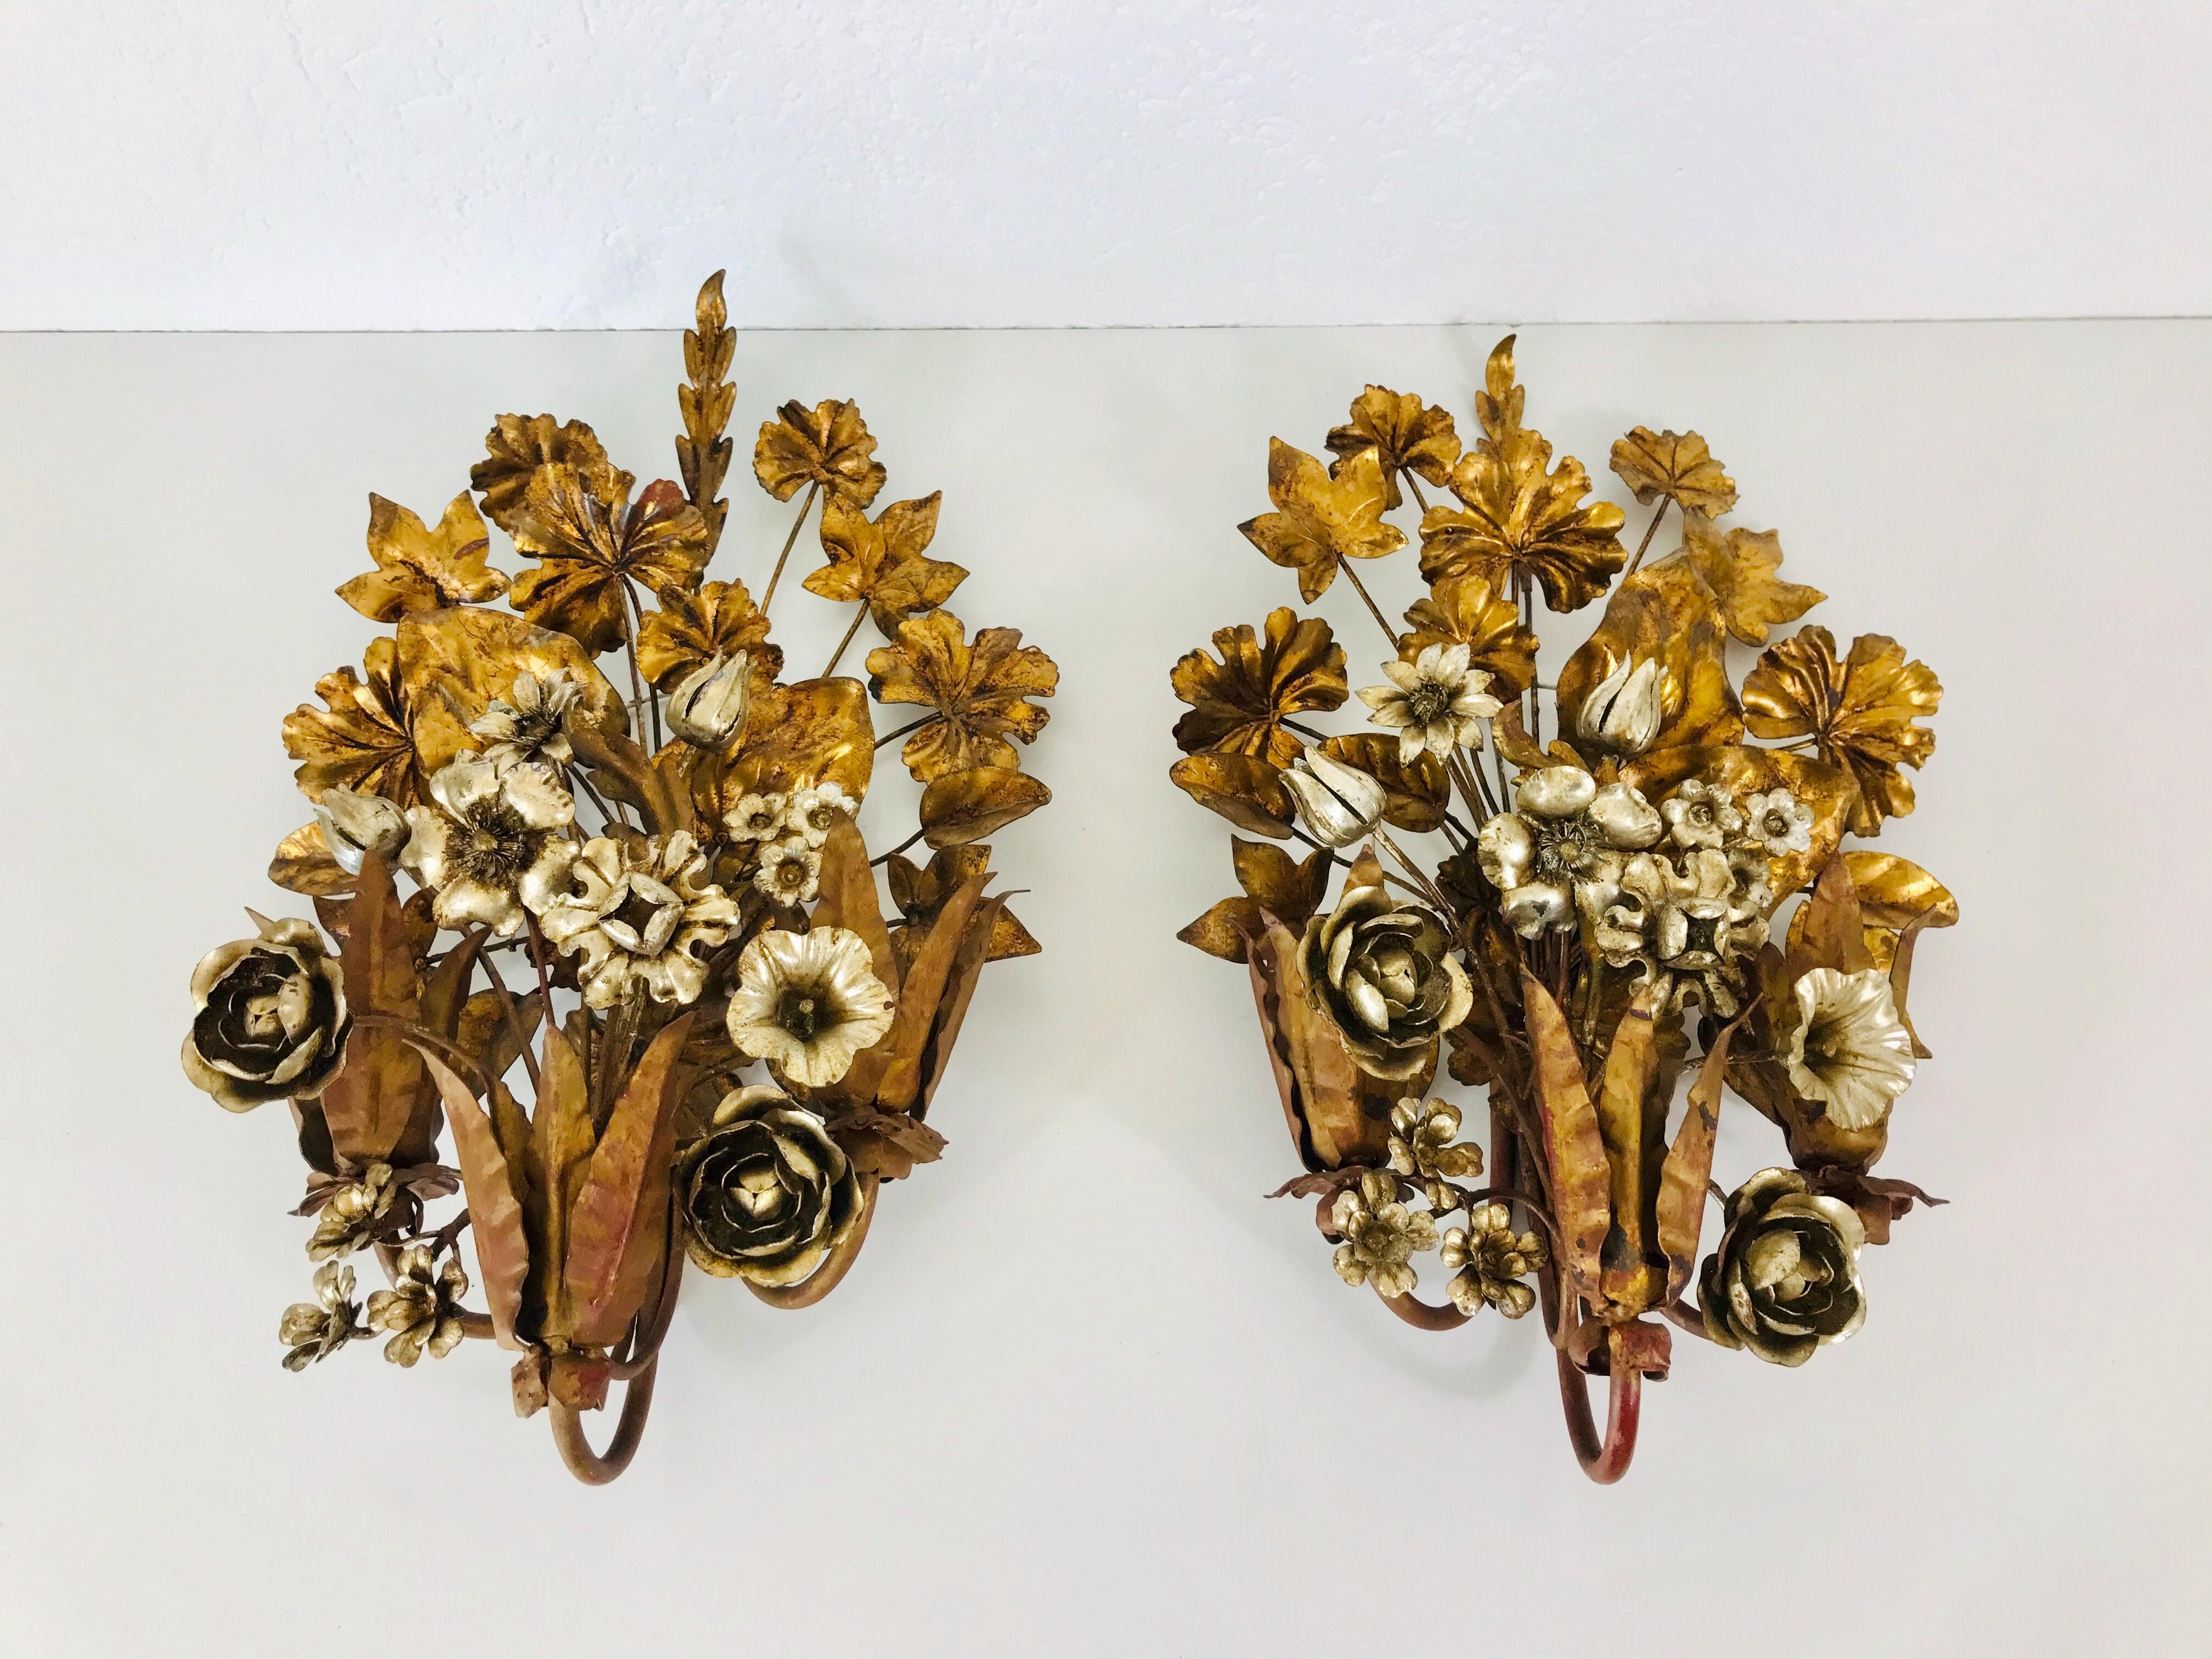 An extraordinary pair of wall lamps by Hans Kögl made in Germany in the 1950s. The lamp has a beautiful flower design. It is made in the period of Hollywood Regency. 

The light requires three E14 light bulbs. Very good vintage condition.

Free